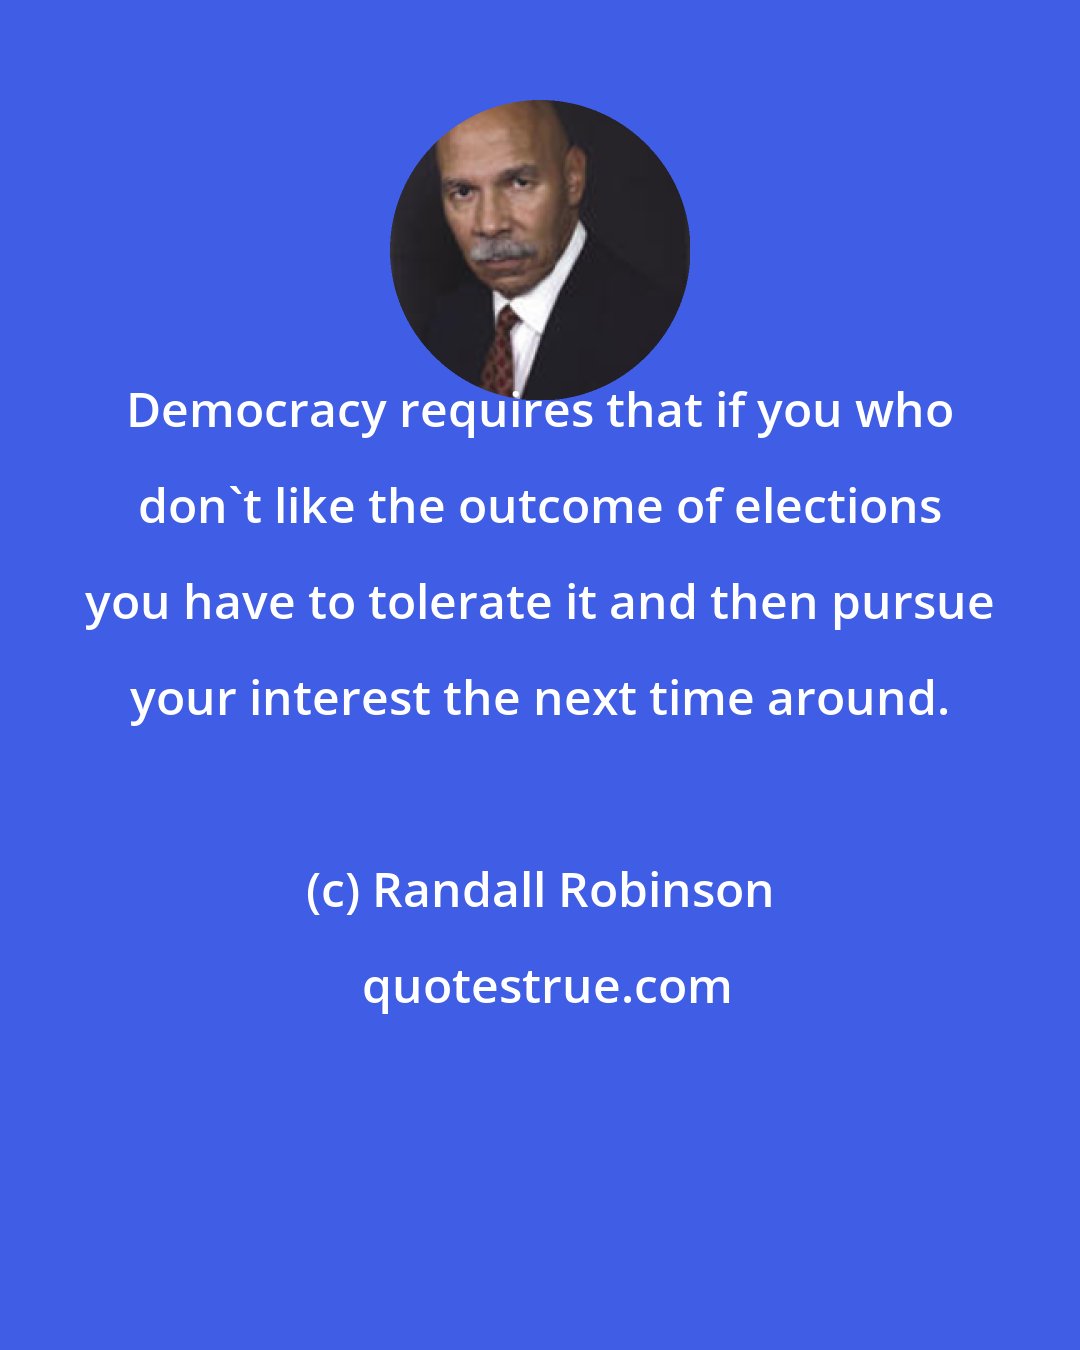 Randall Robinson: Democracy requires that if you who don't like the outcome of elections you have to tolerate it and then pursue your interest the next time around.